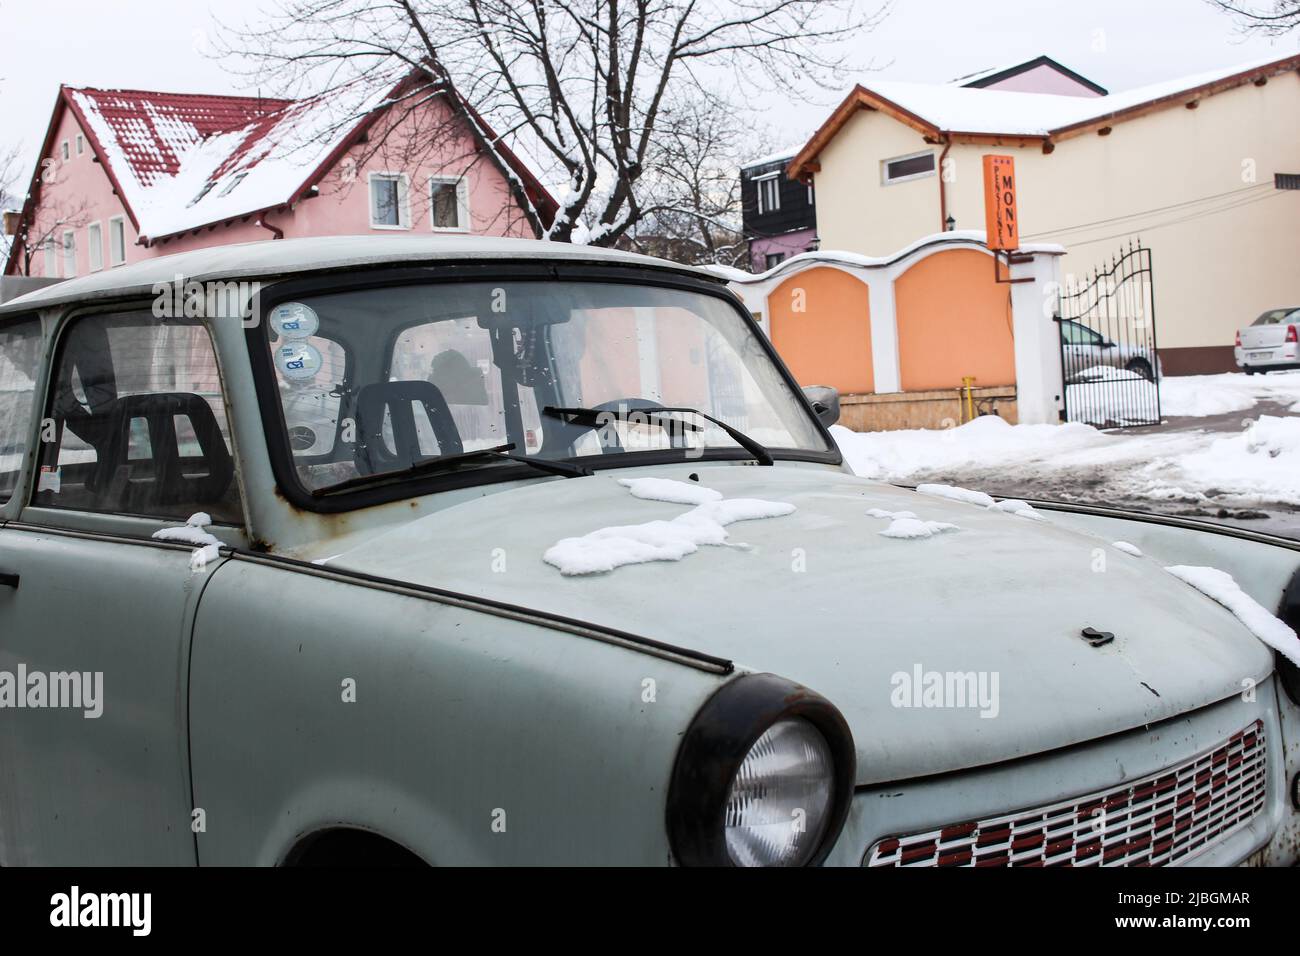 Brasov, Romania - February 9, 2017 : Parked old European car (mint green colour) in winter. Stock Photo